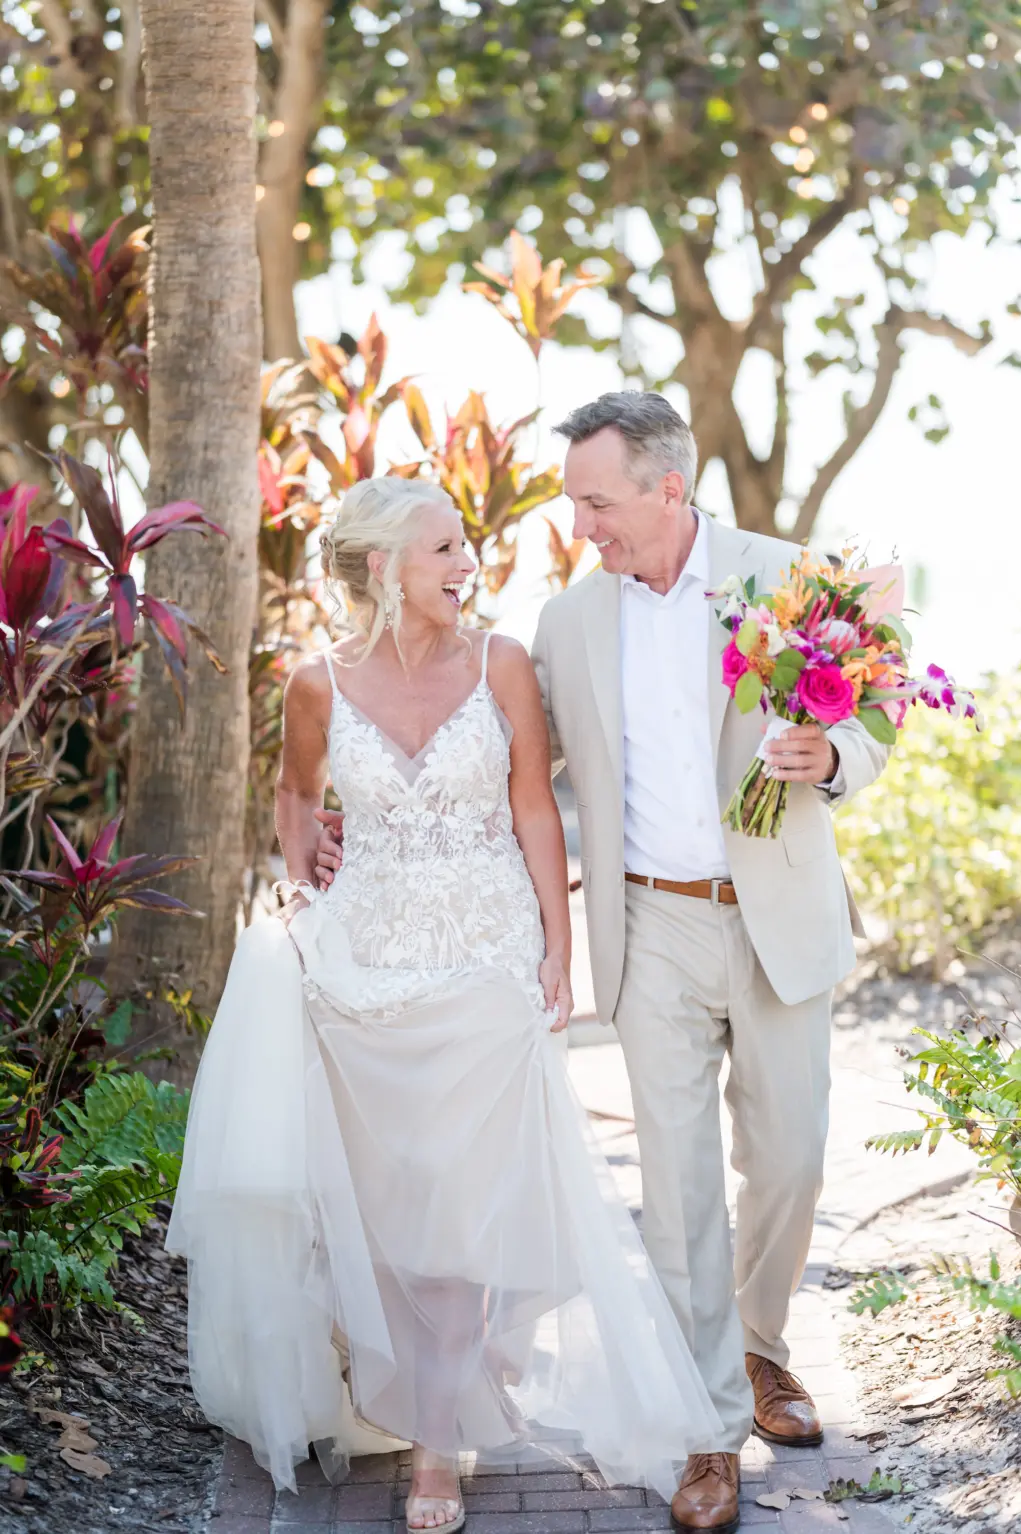 Bride and Groom Wedding Portrait with Bright Floral Bouquet Ideas